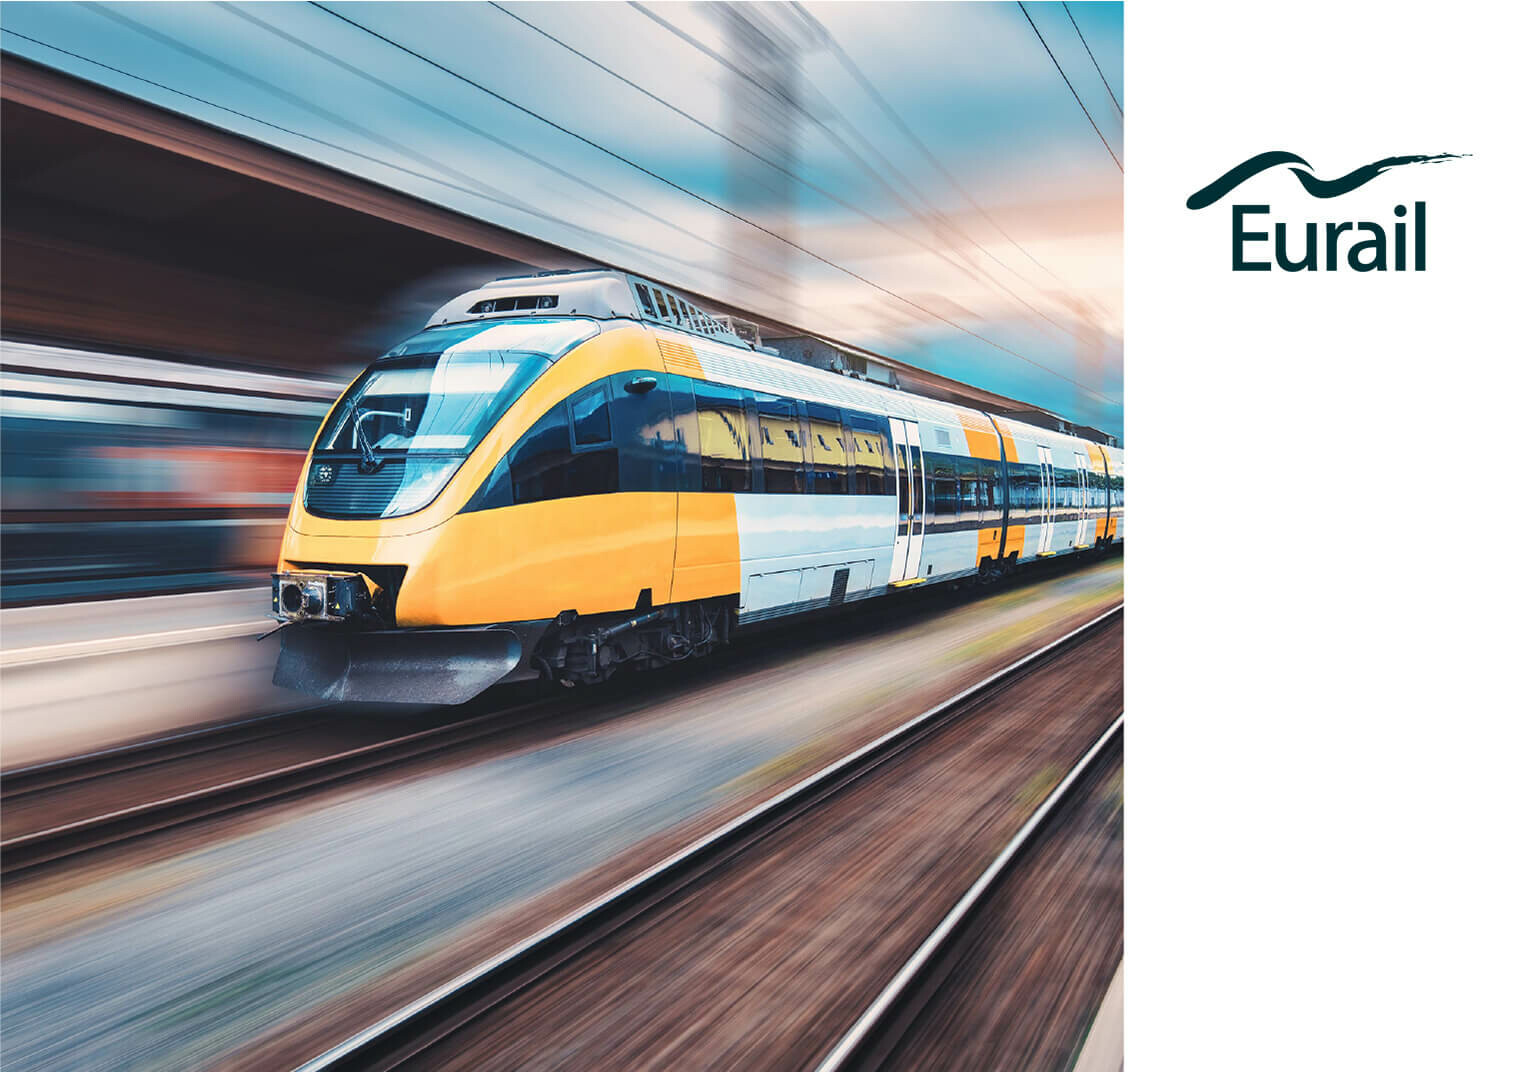 Eurail helps travellers worldwide to flexibly travel across Europe.